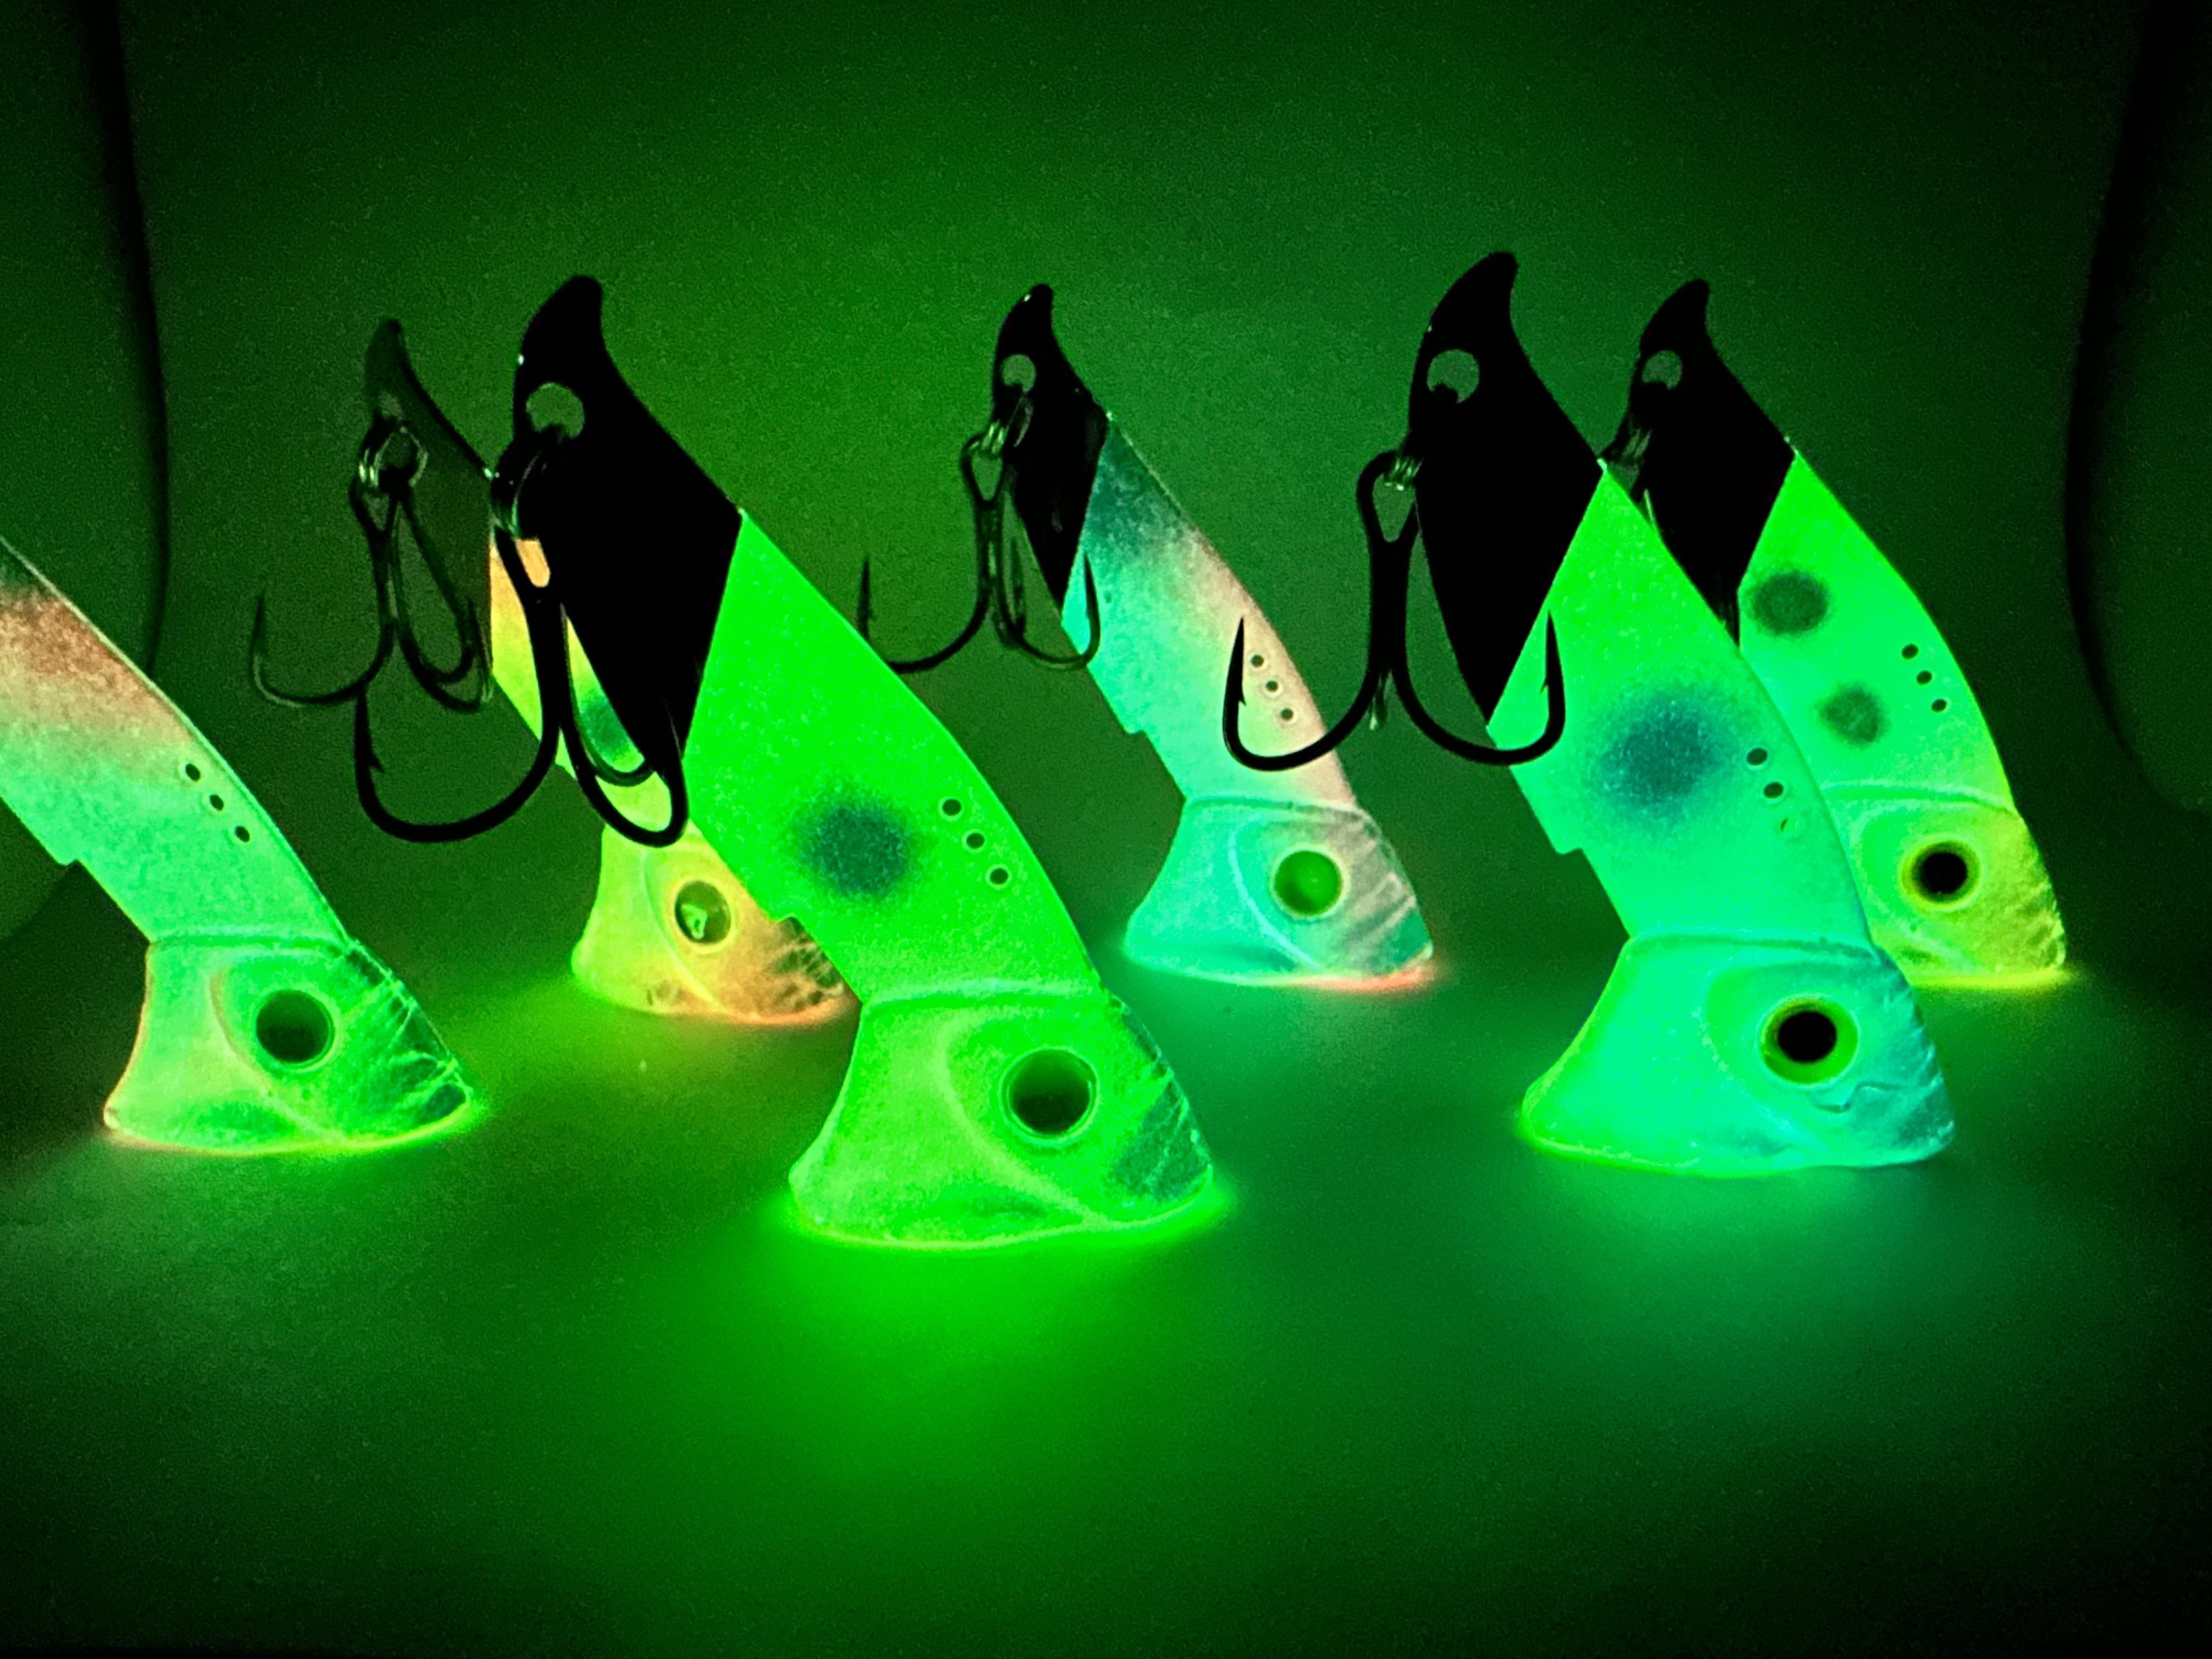 Vertical Minnow Blade Bait - Glow Series – Vertical Jigs and Lures